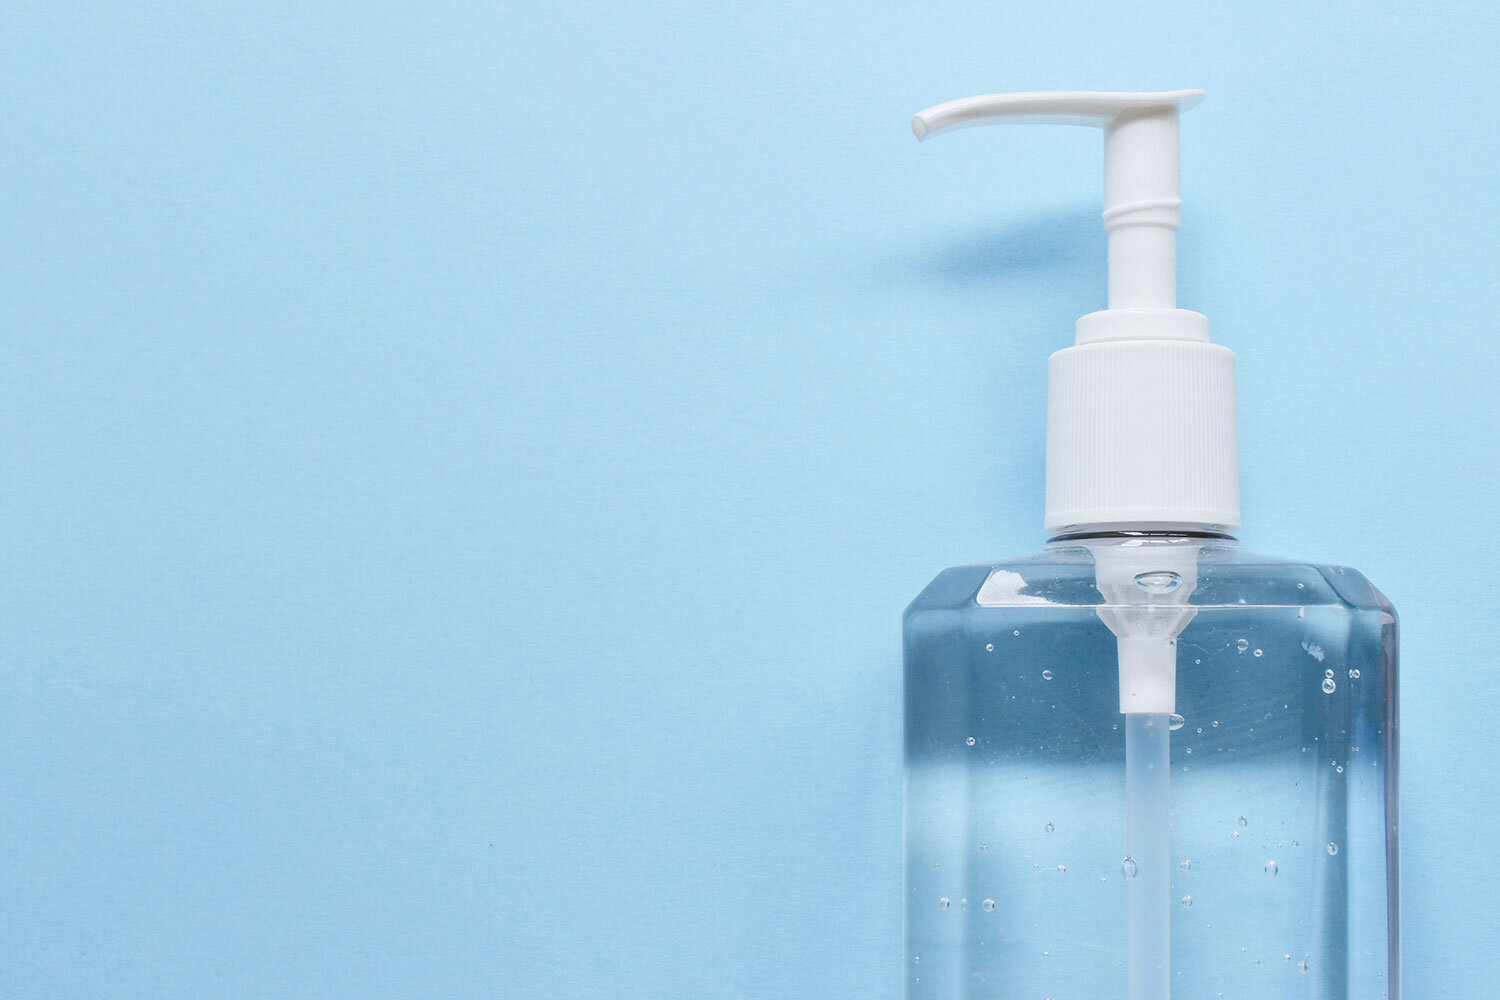 Hand Sanitizers Are Designed to Protect People Navigating This Environment